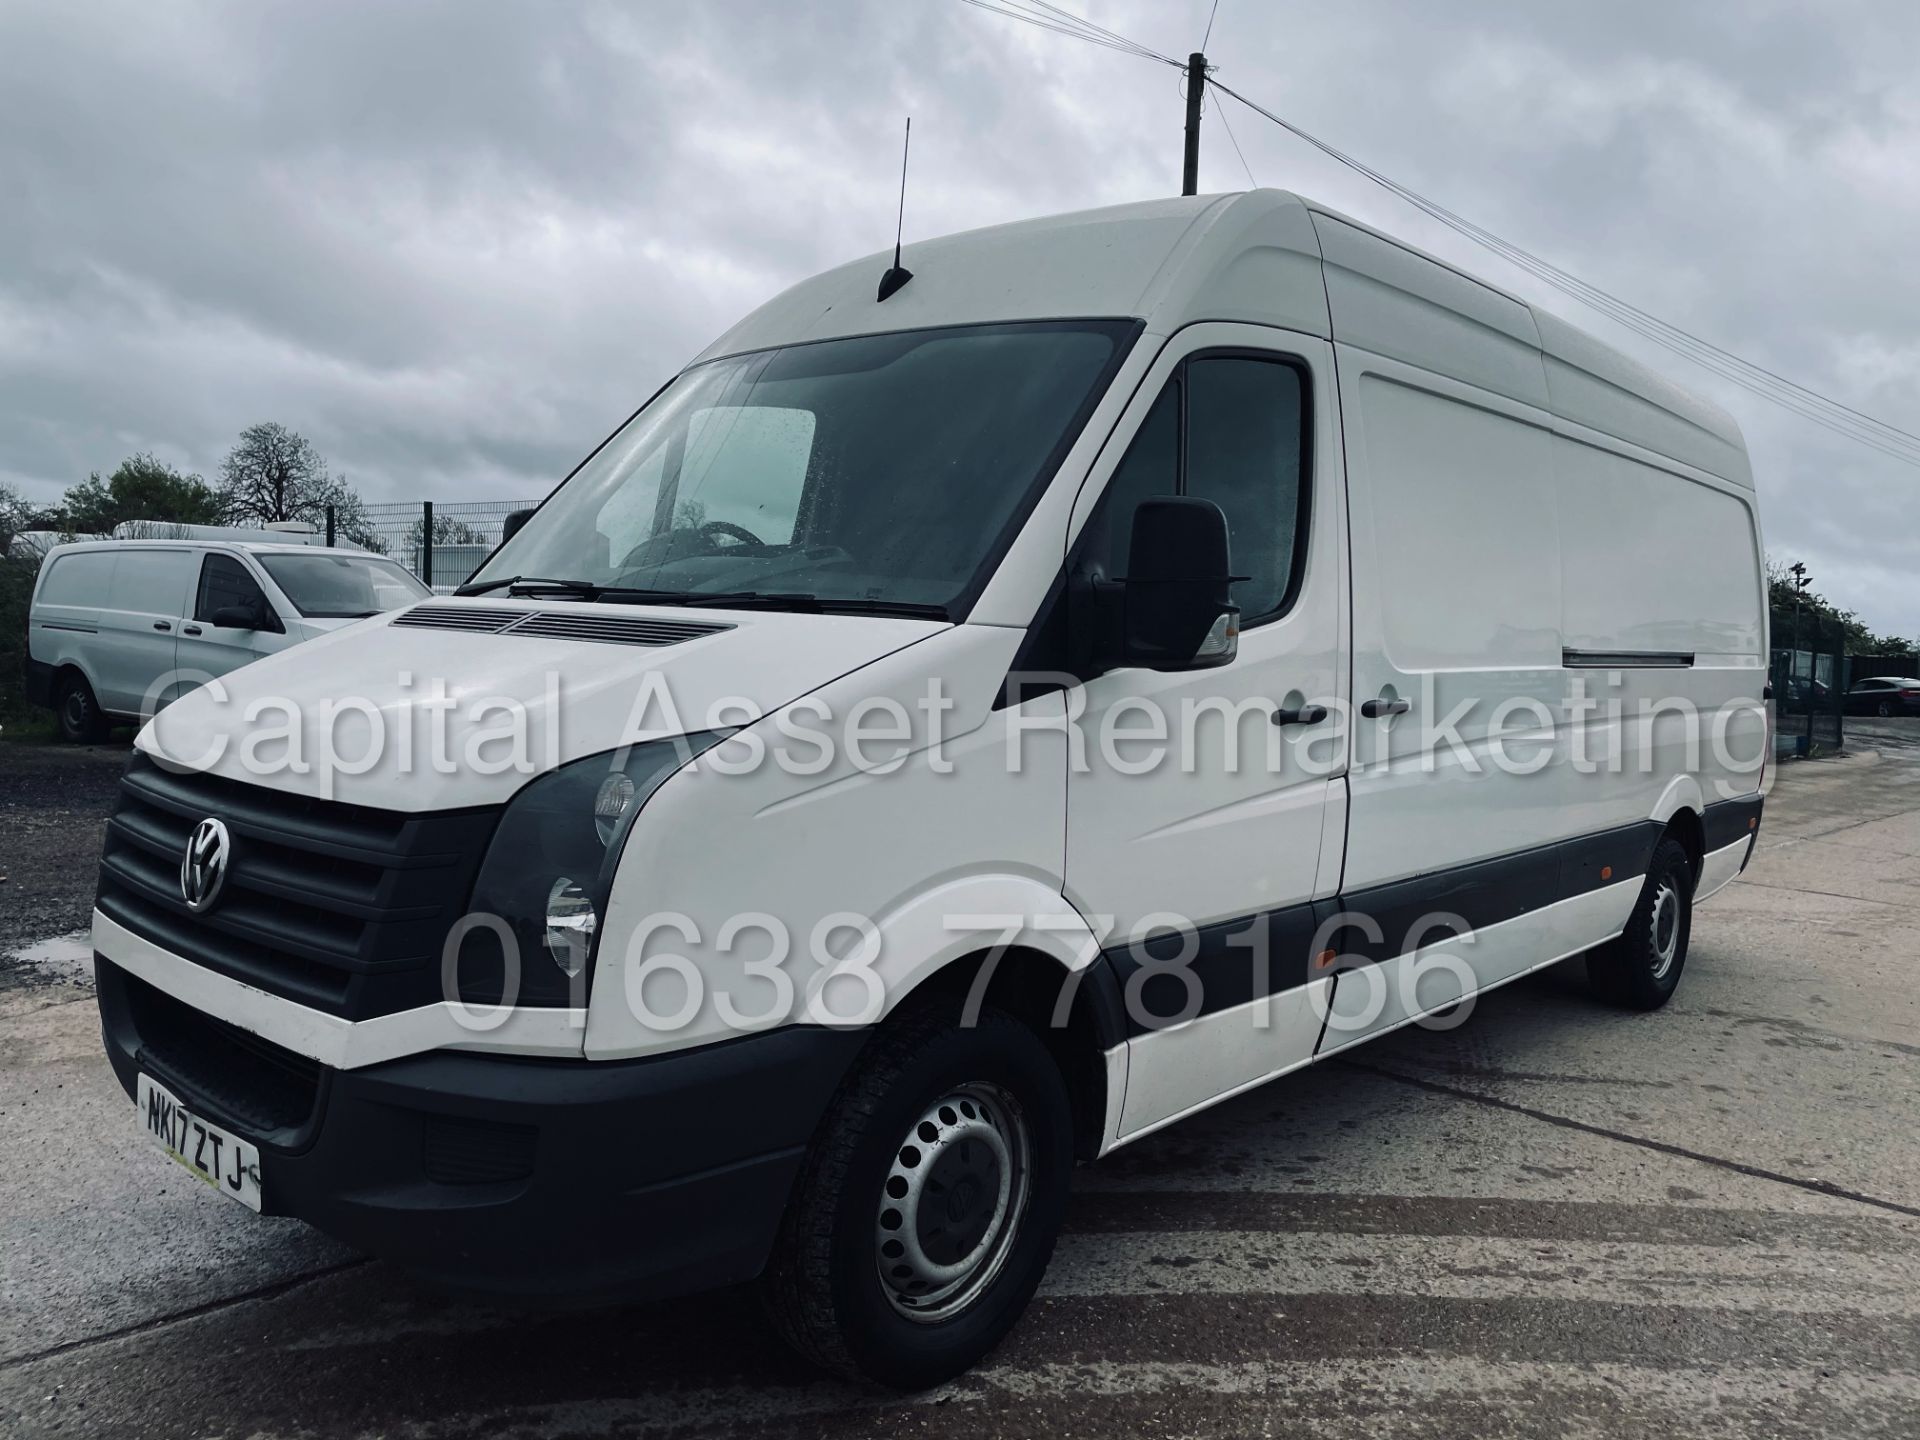 (On Sale) VOLKSWAGEN CRAFTER *LWB HI-ROOF* (2017 - EURO 6) '2.0 TDI BMT - 6 SPEED' *CRUISE CONTROL* - Image 5 of 39